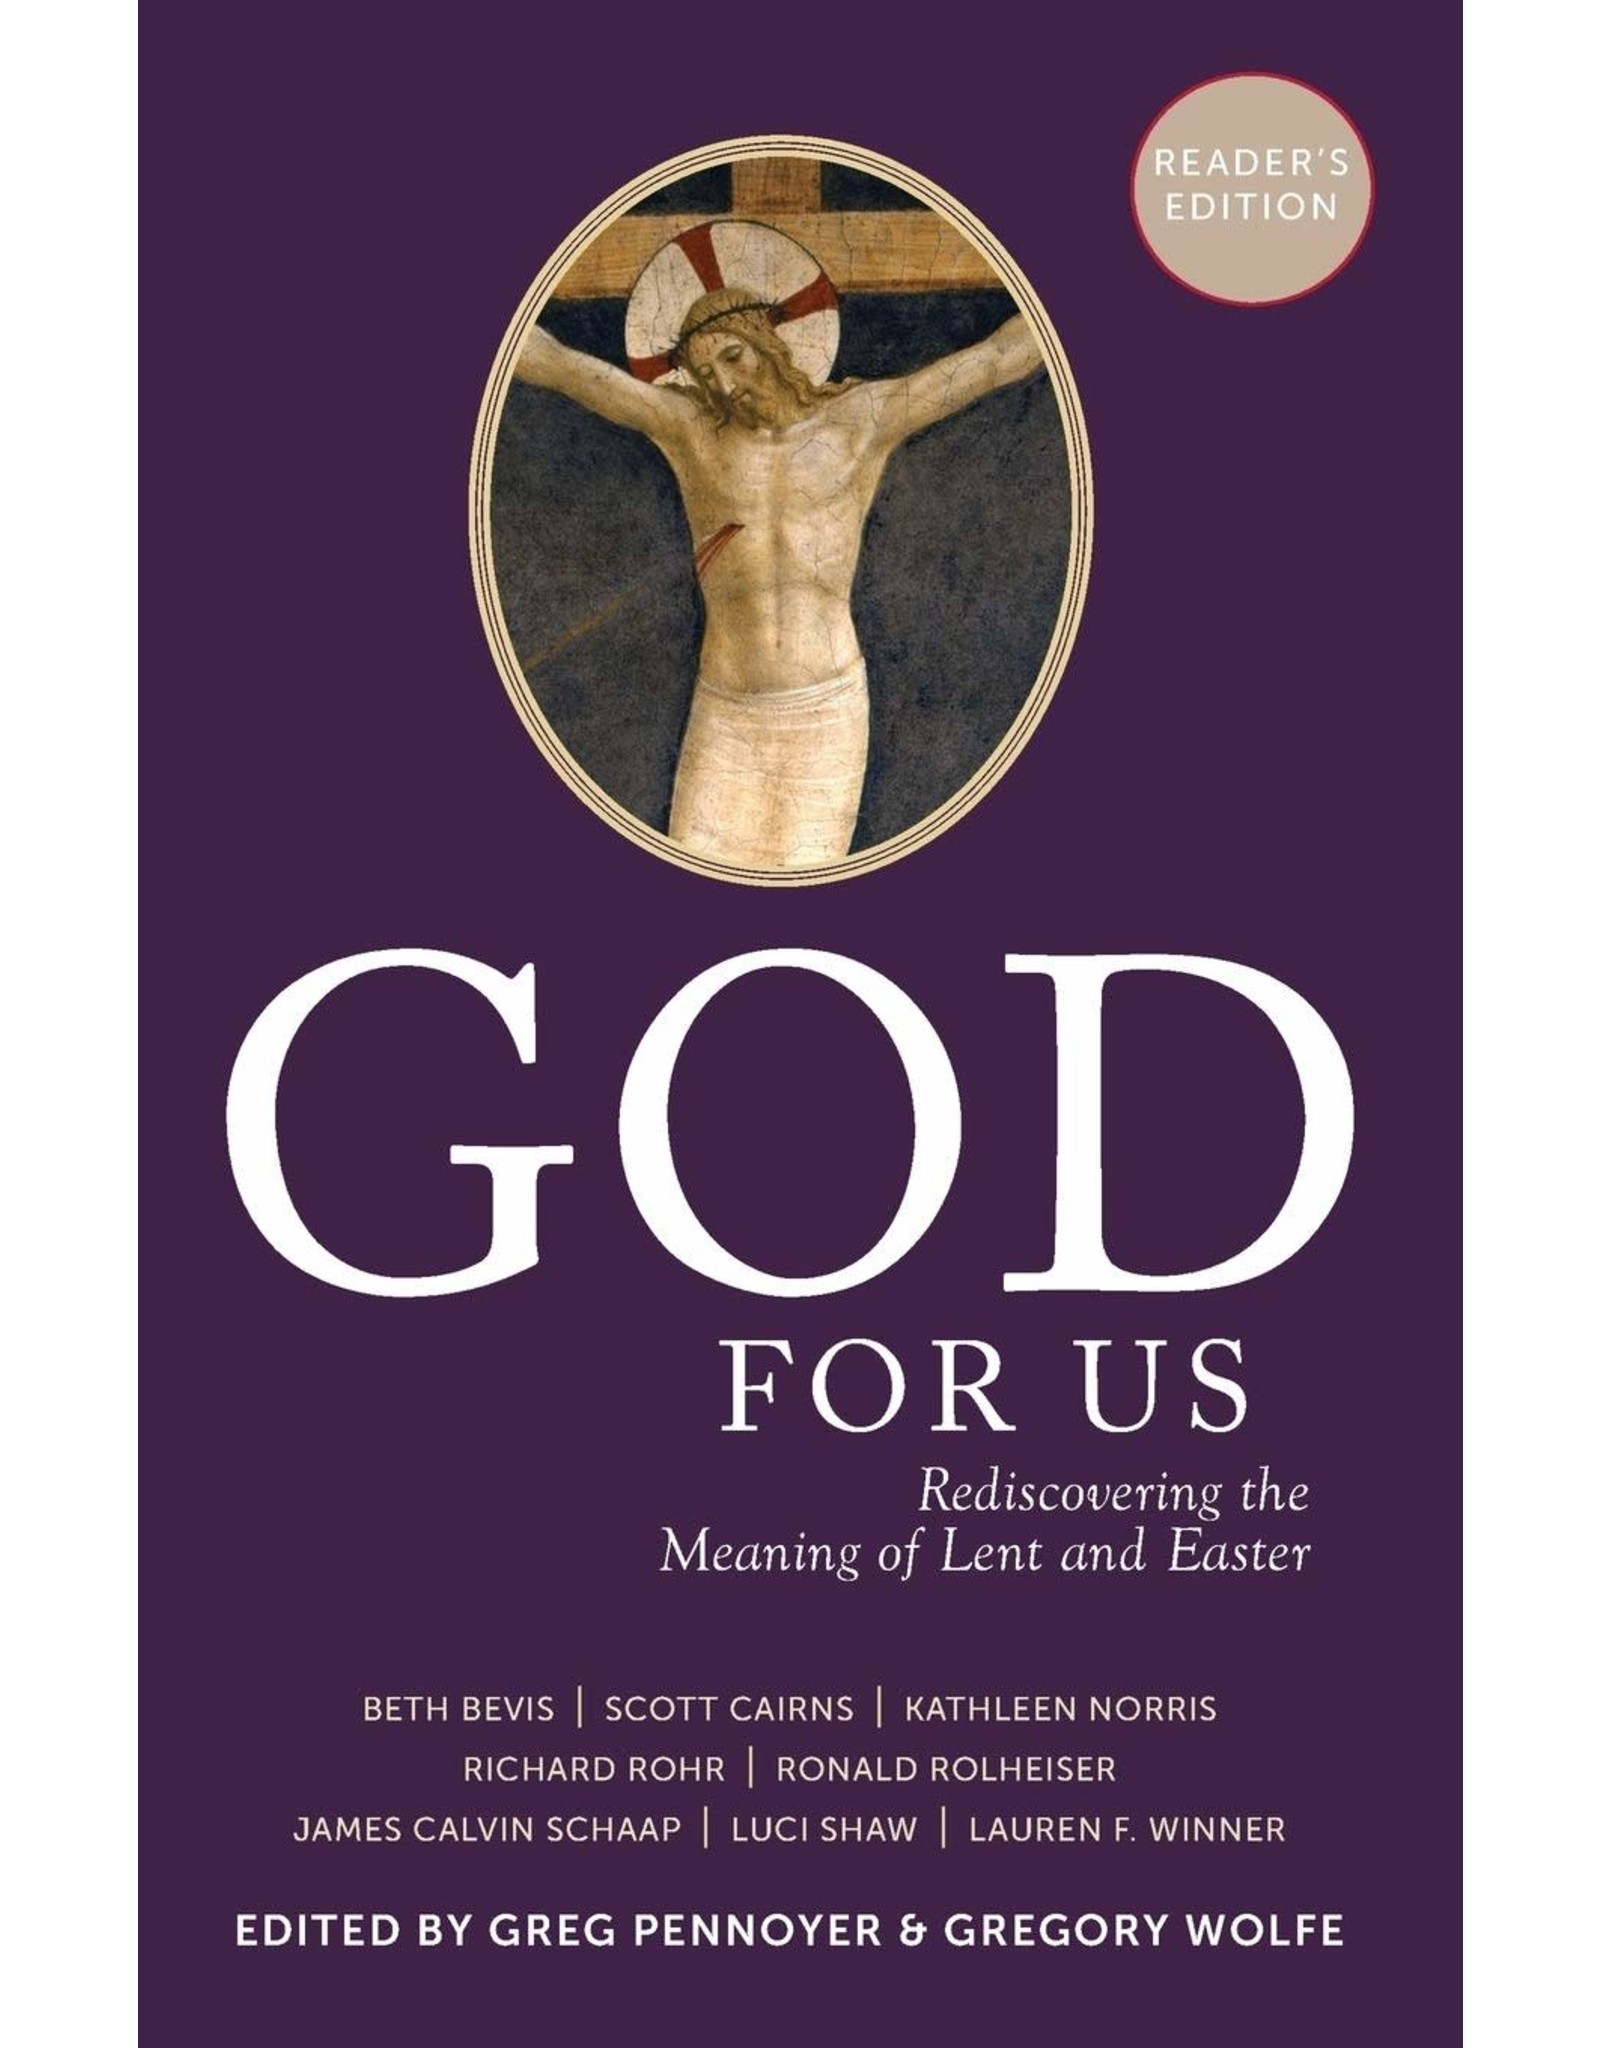 God For Us: Rediscovering the Meaning of Lent and Easter